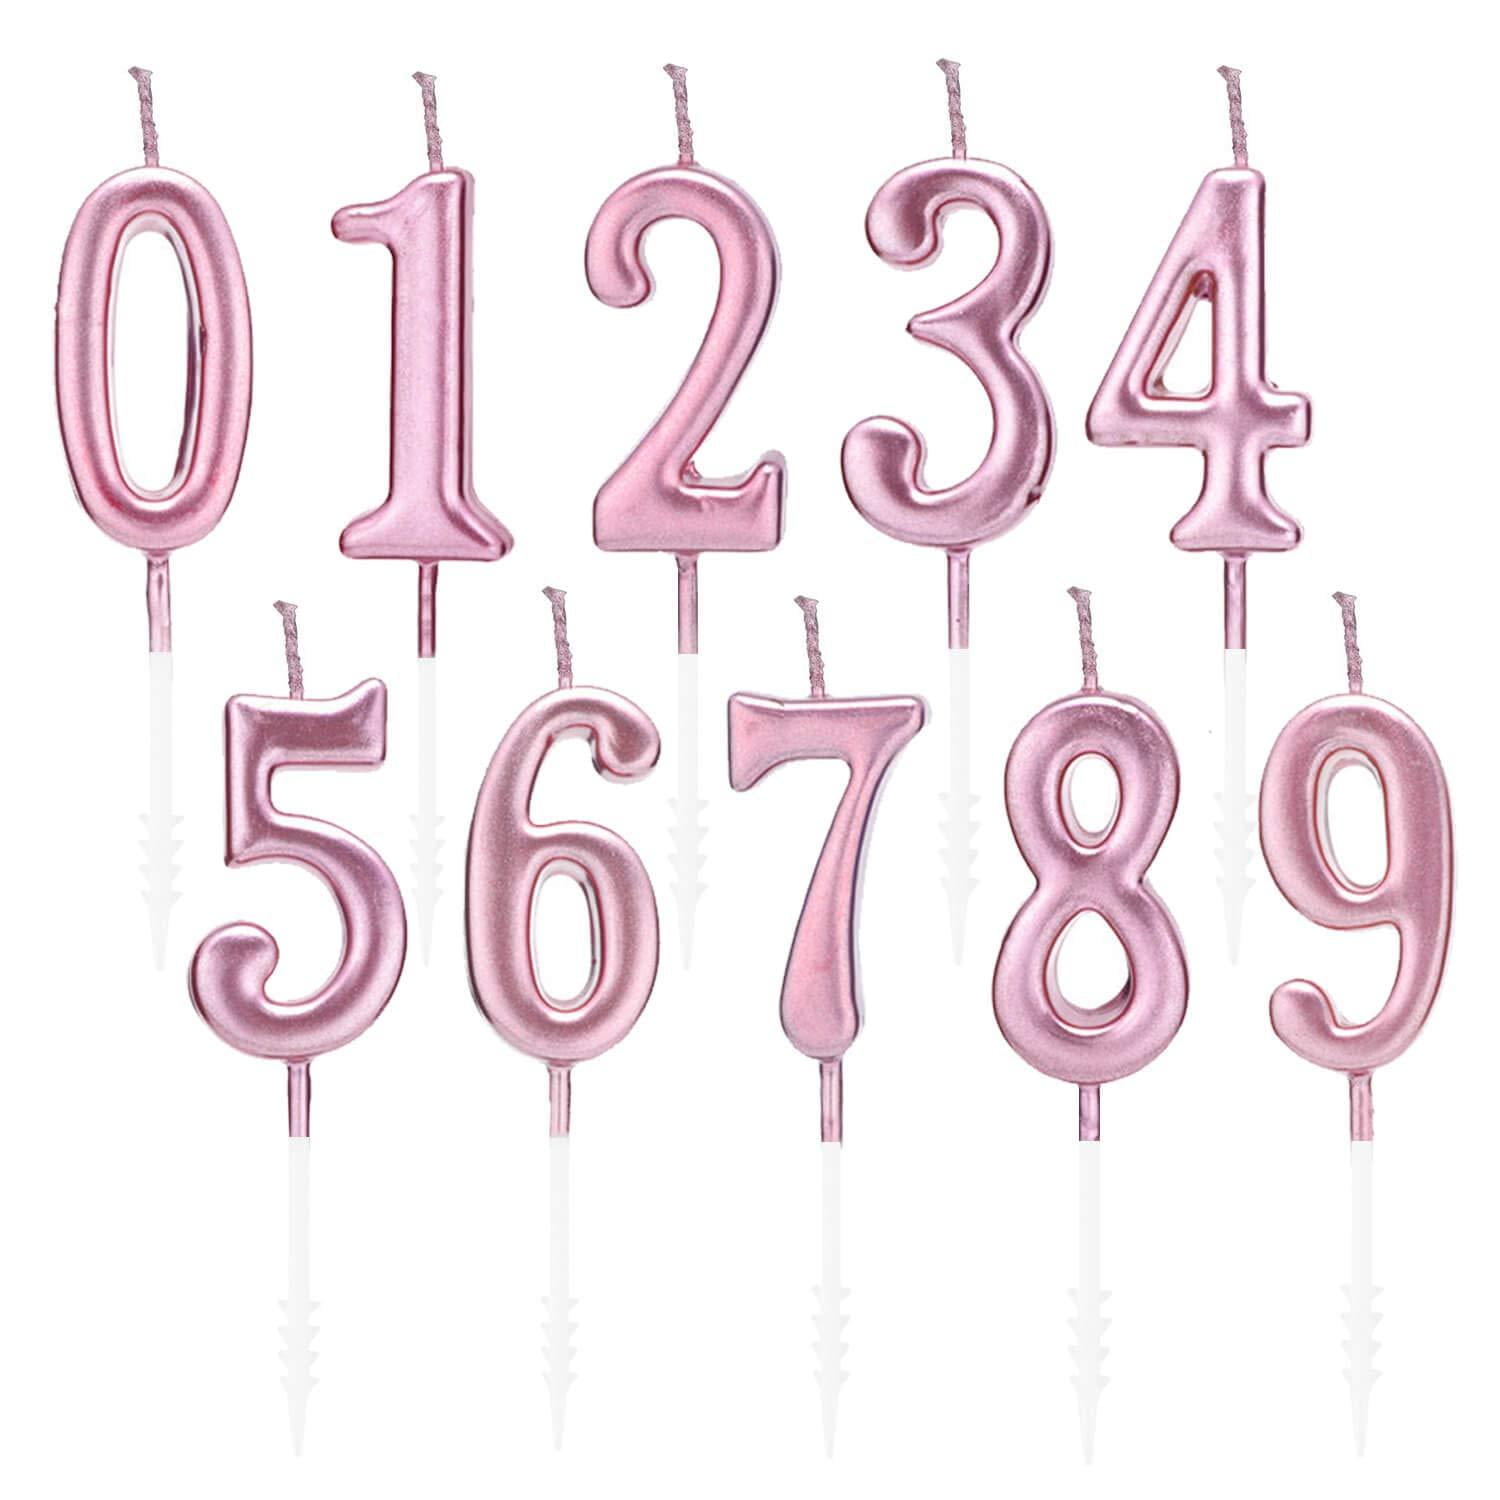 Cake Numeric Candles Number 0 1 2 3 4 5 6 7 8 9 Used for Cake Decoration on Birthday Parties and Wedding Anniversary Celebrations Beanlieve Blue Numeral Birthday Candles 10 Pieces